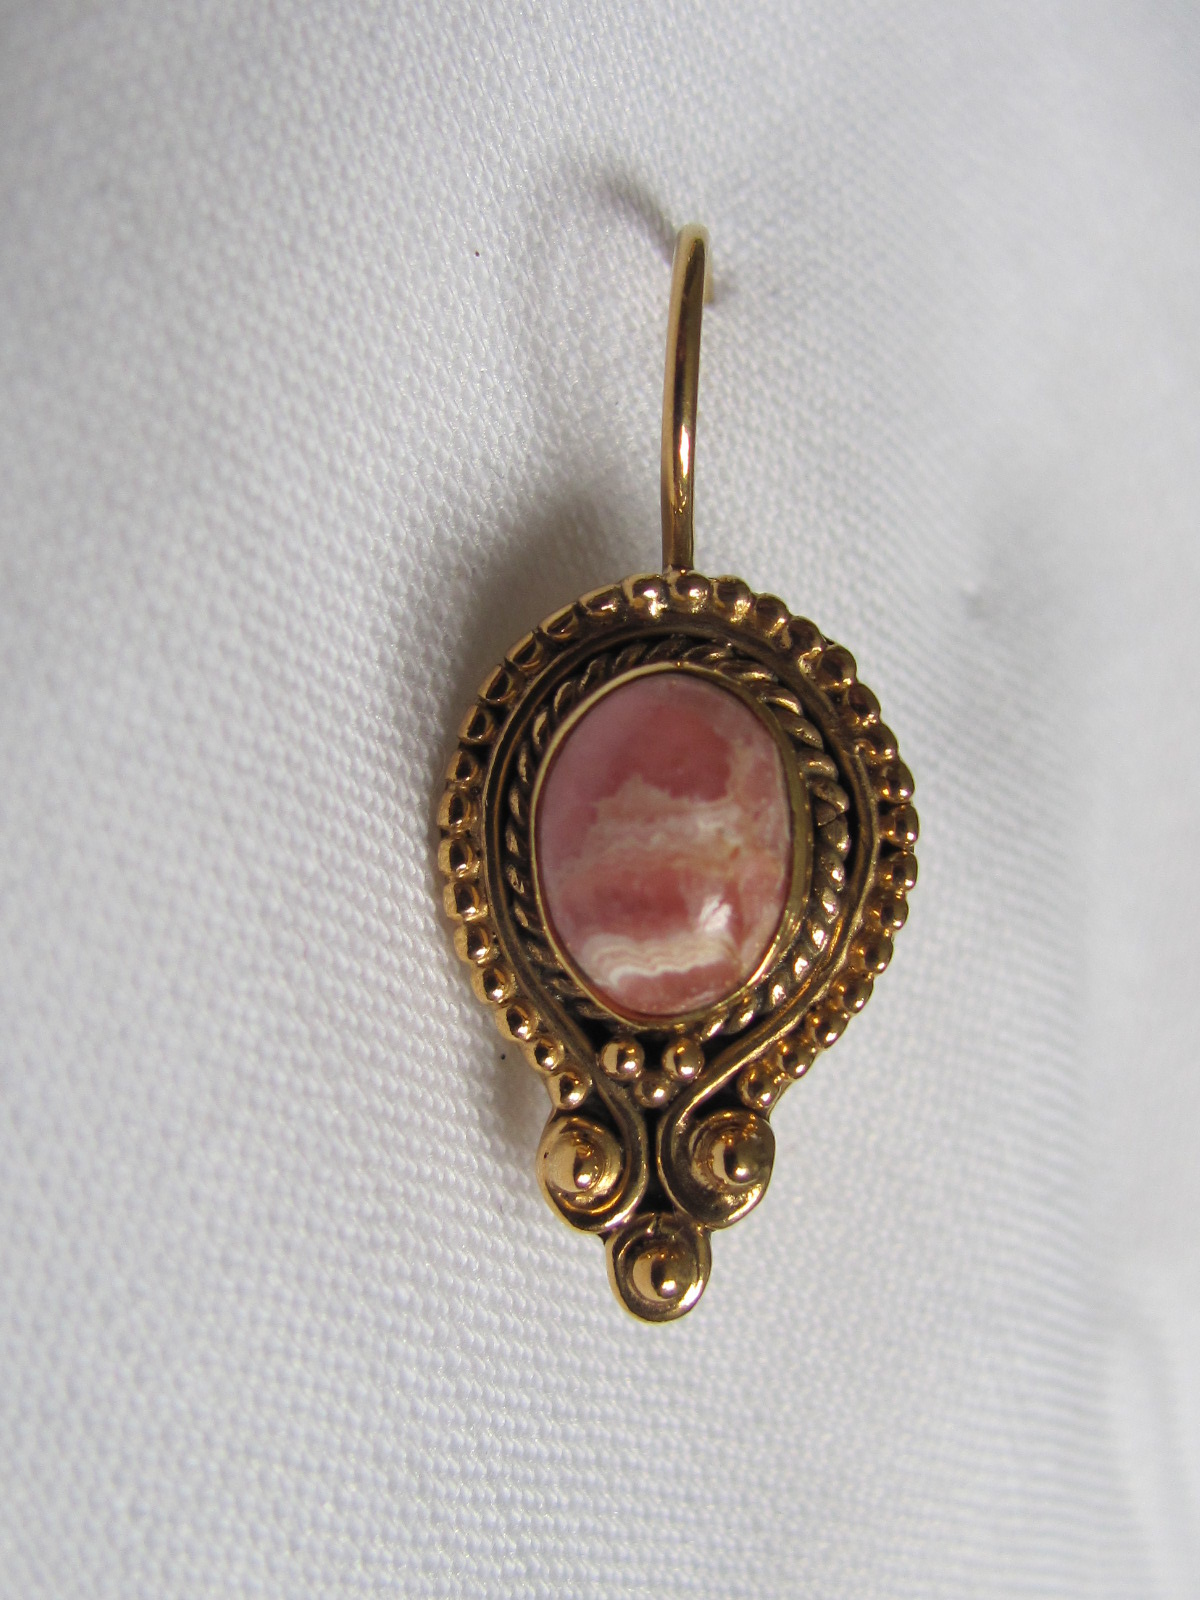 Earring gold on silver with  rhodocrosite